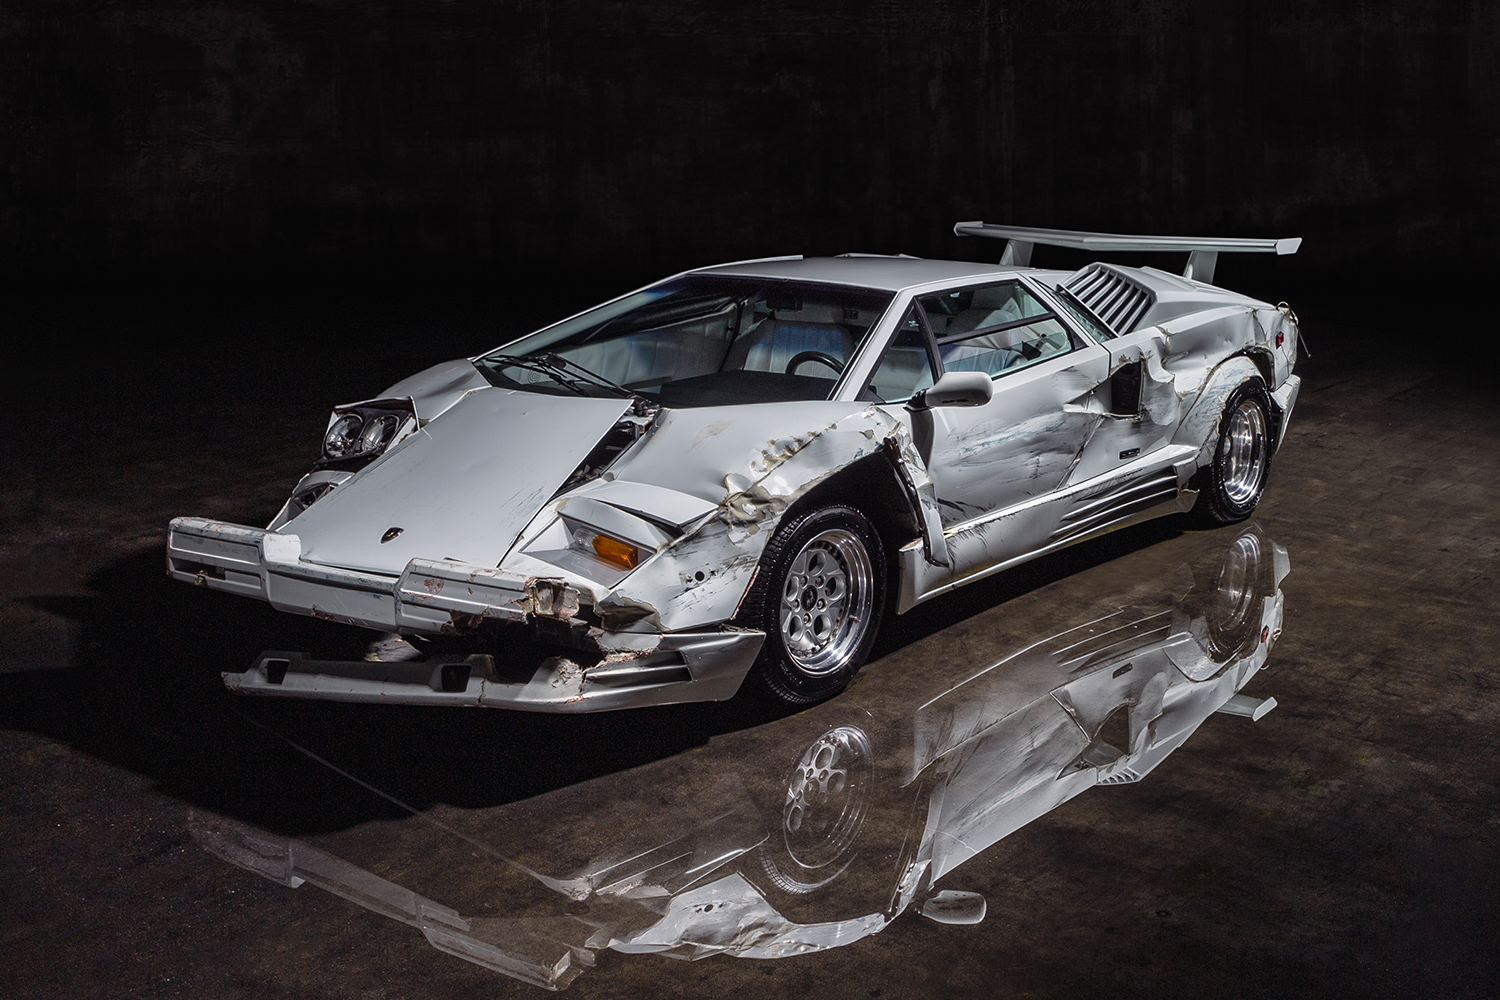 1989 Lamborghini Countach 25th Anniversary Edition Hero Car from The Wolf of Wall Street